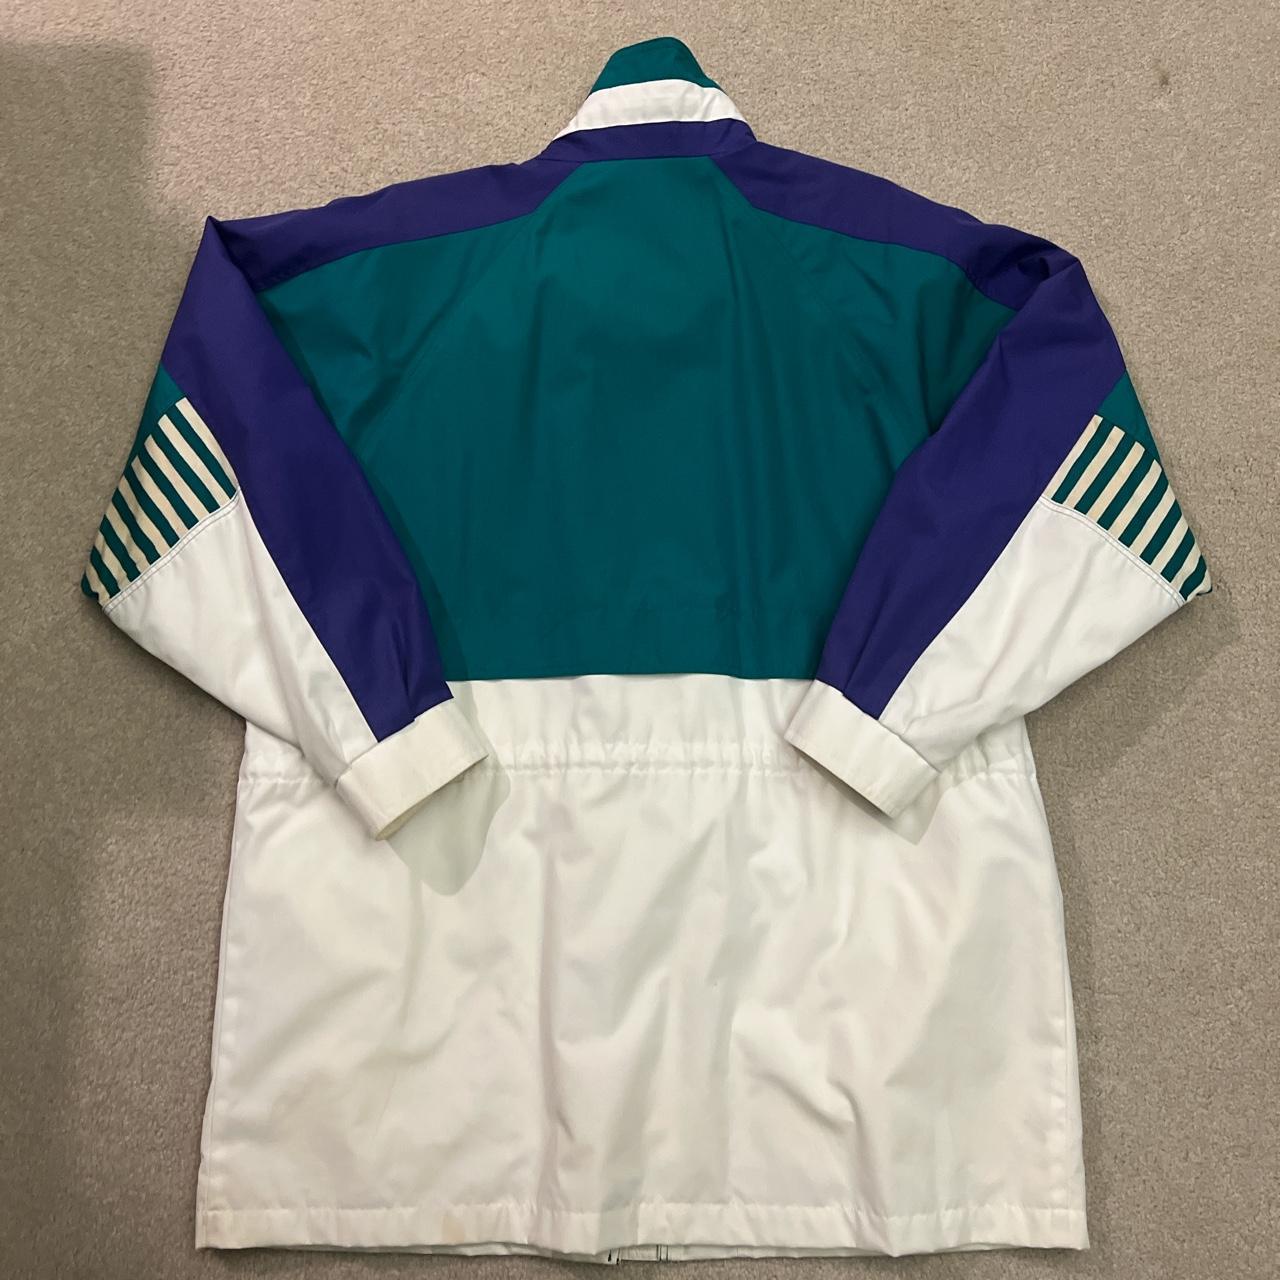 Current Seen Women's White and Purple Jacket (4)